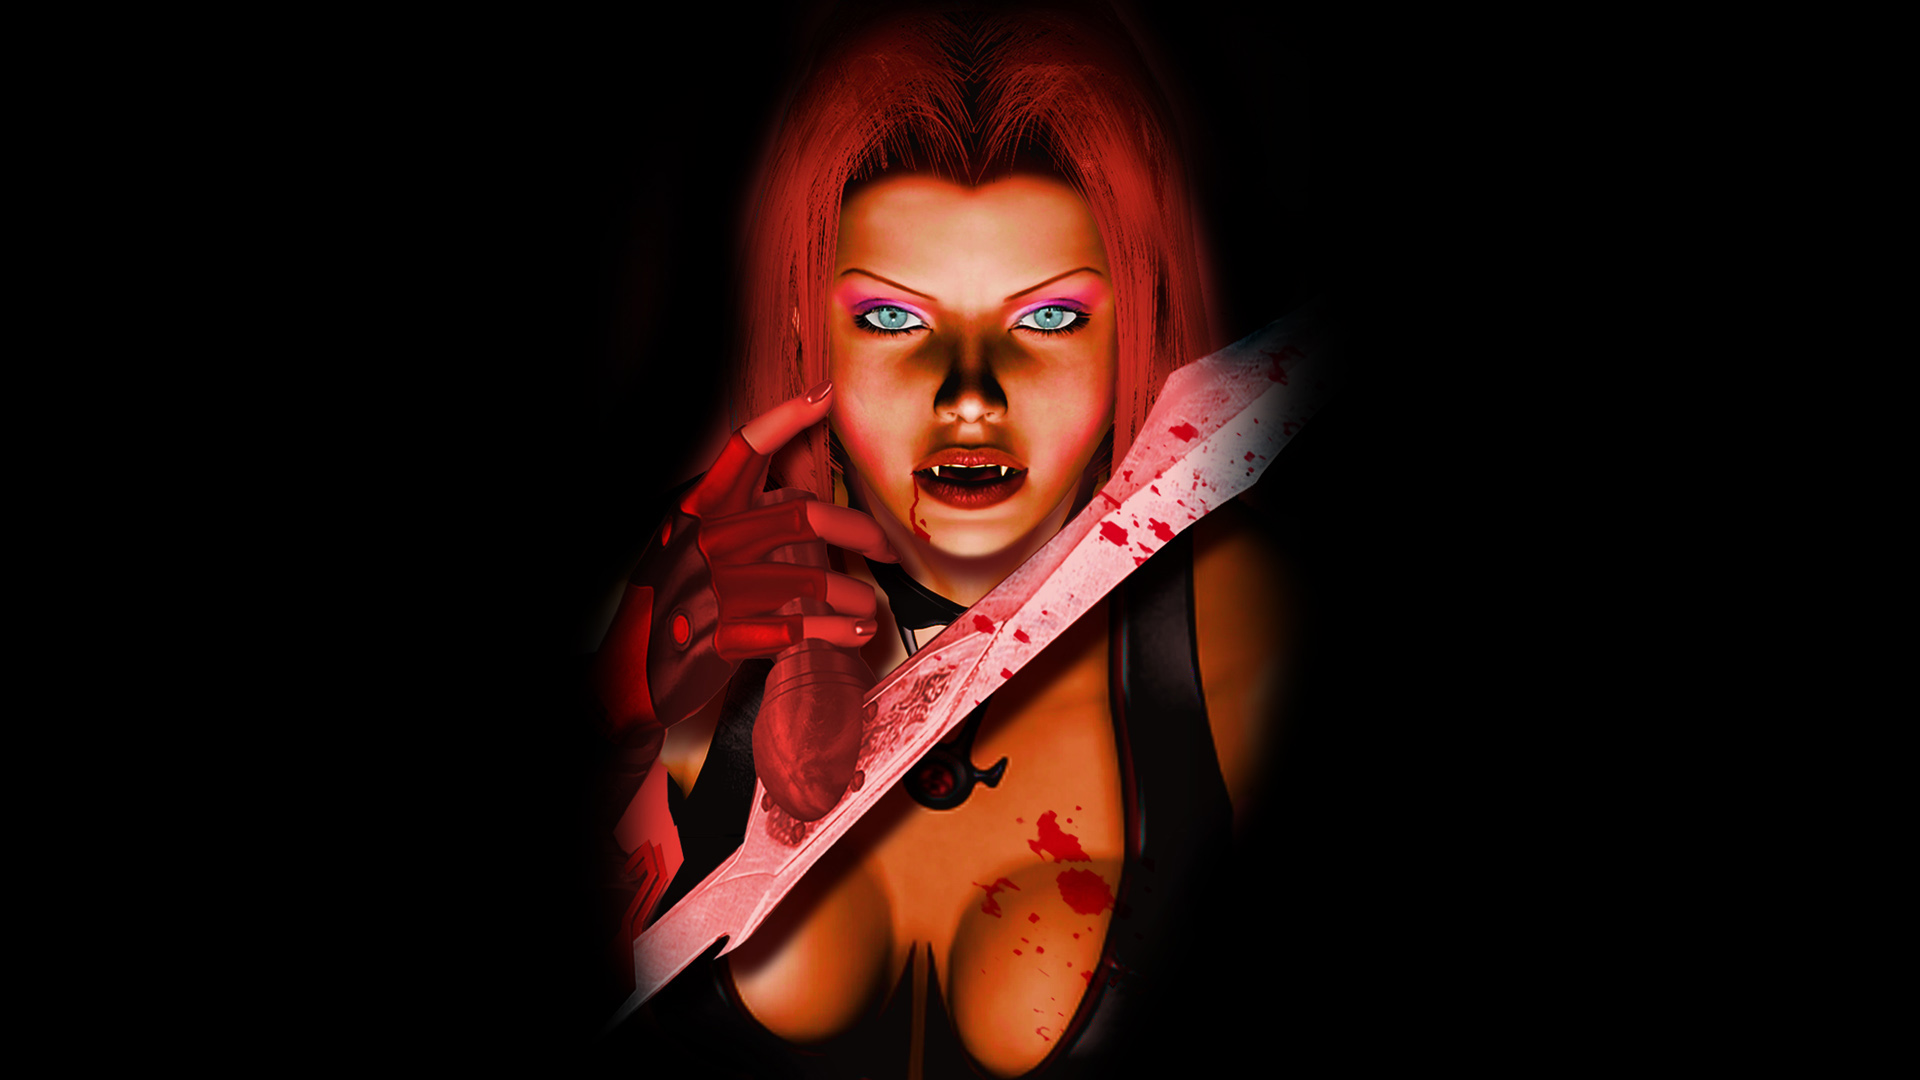 Nice wallpapers Bloodrayne 1920x1080px